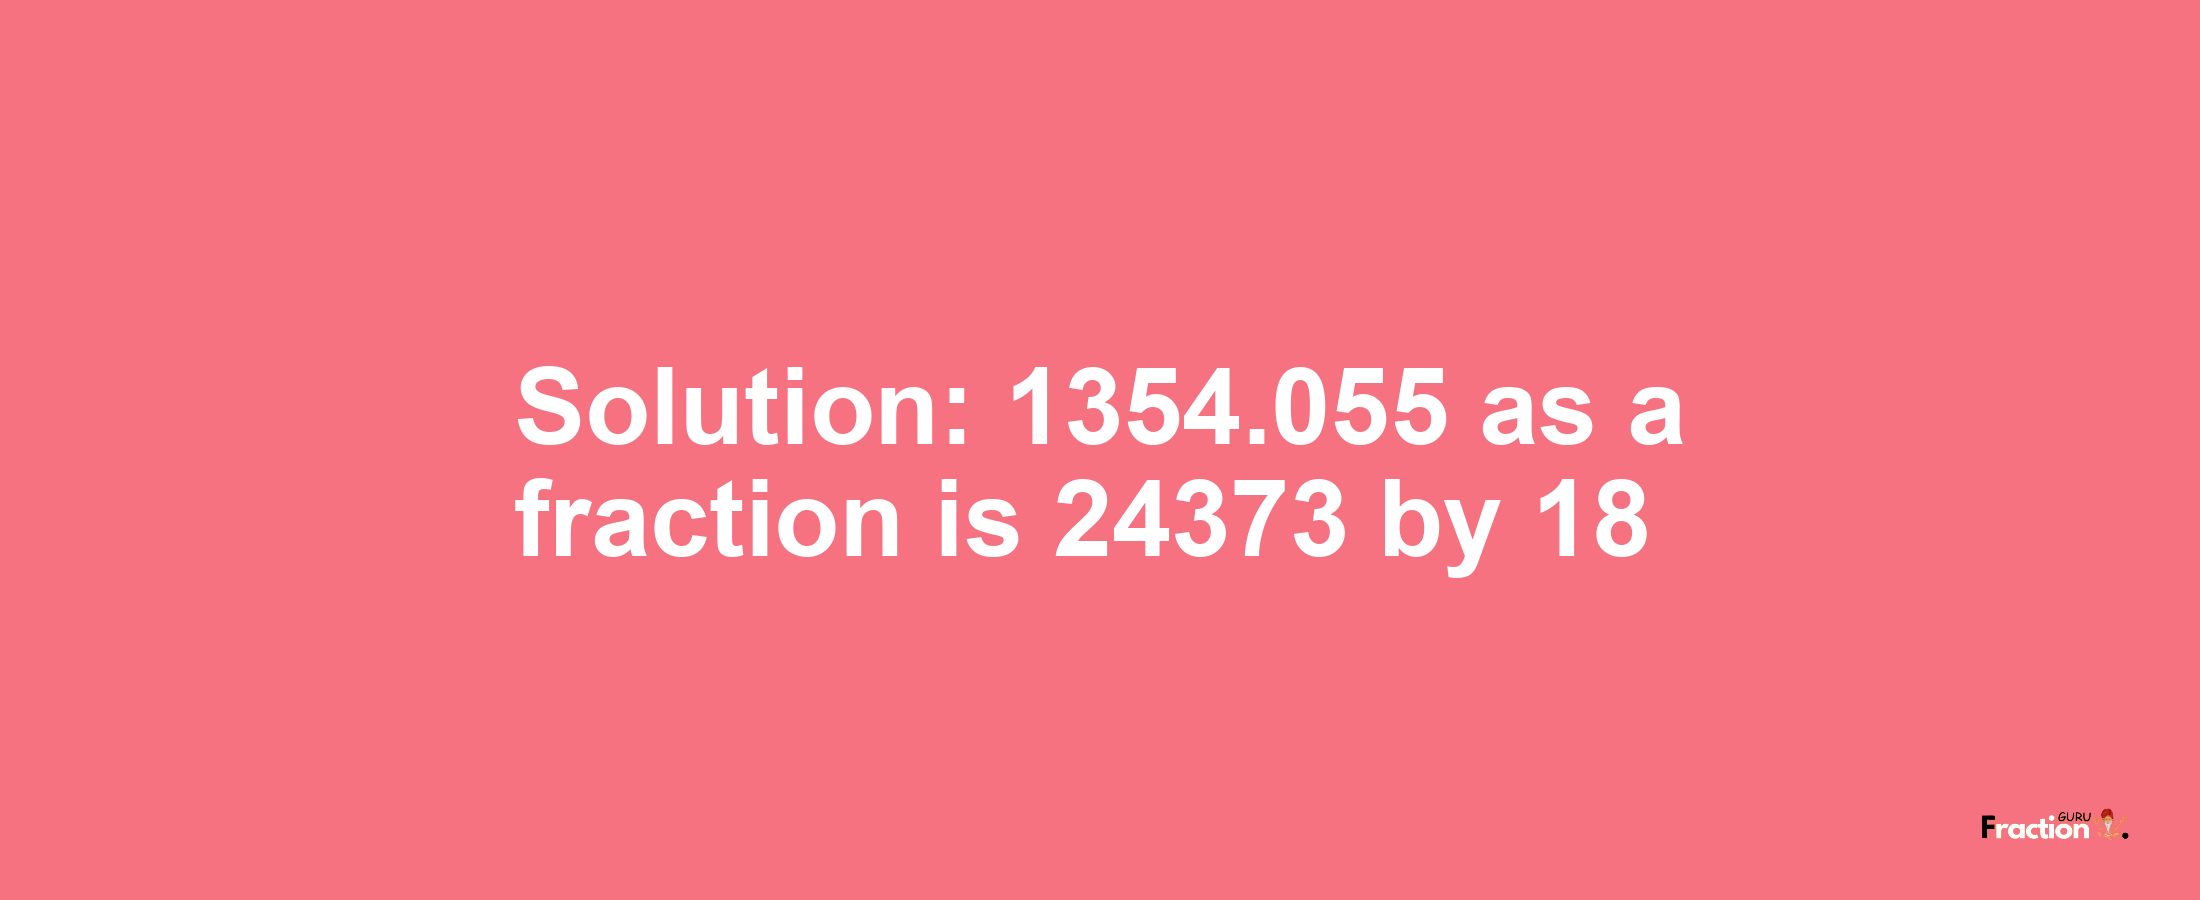 Solution:1354.055 as a fraction is 24373/18